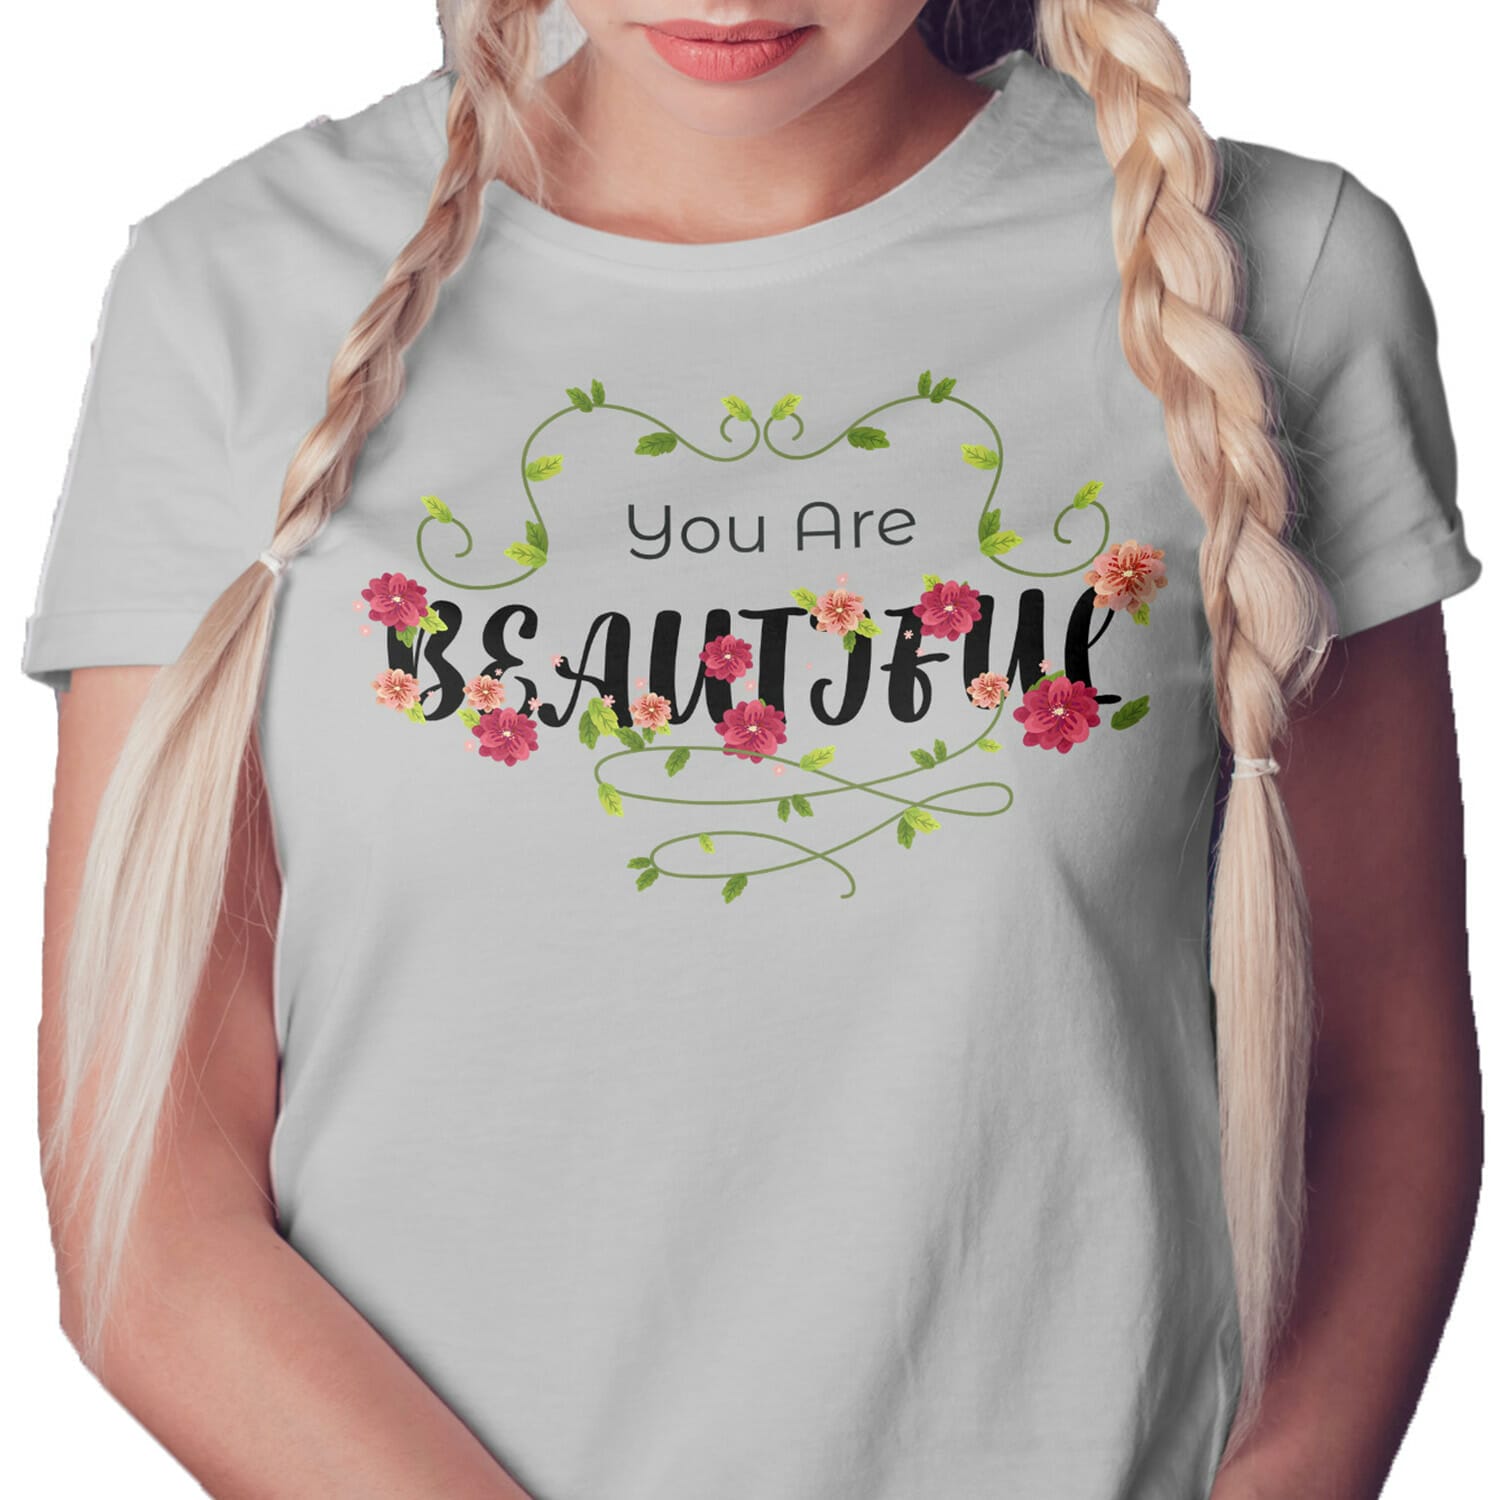 you are beautiful t shirt design for girls